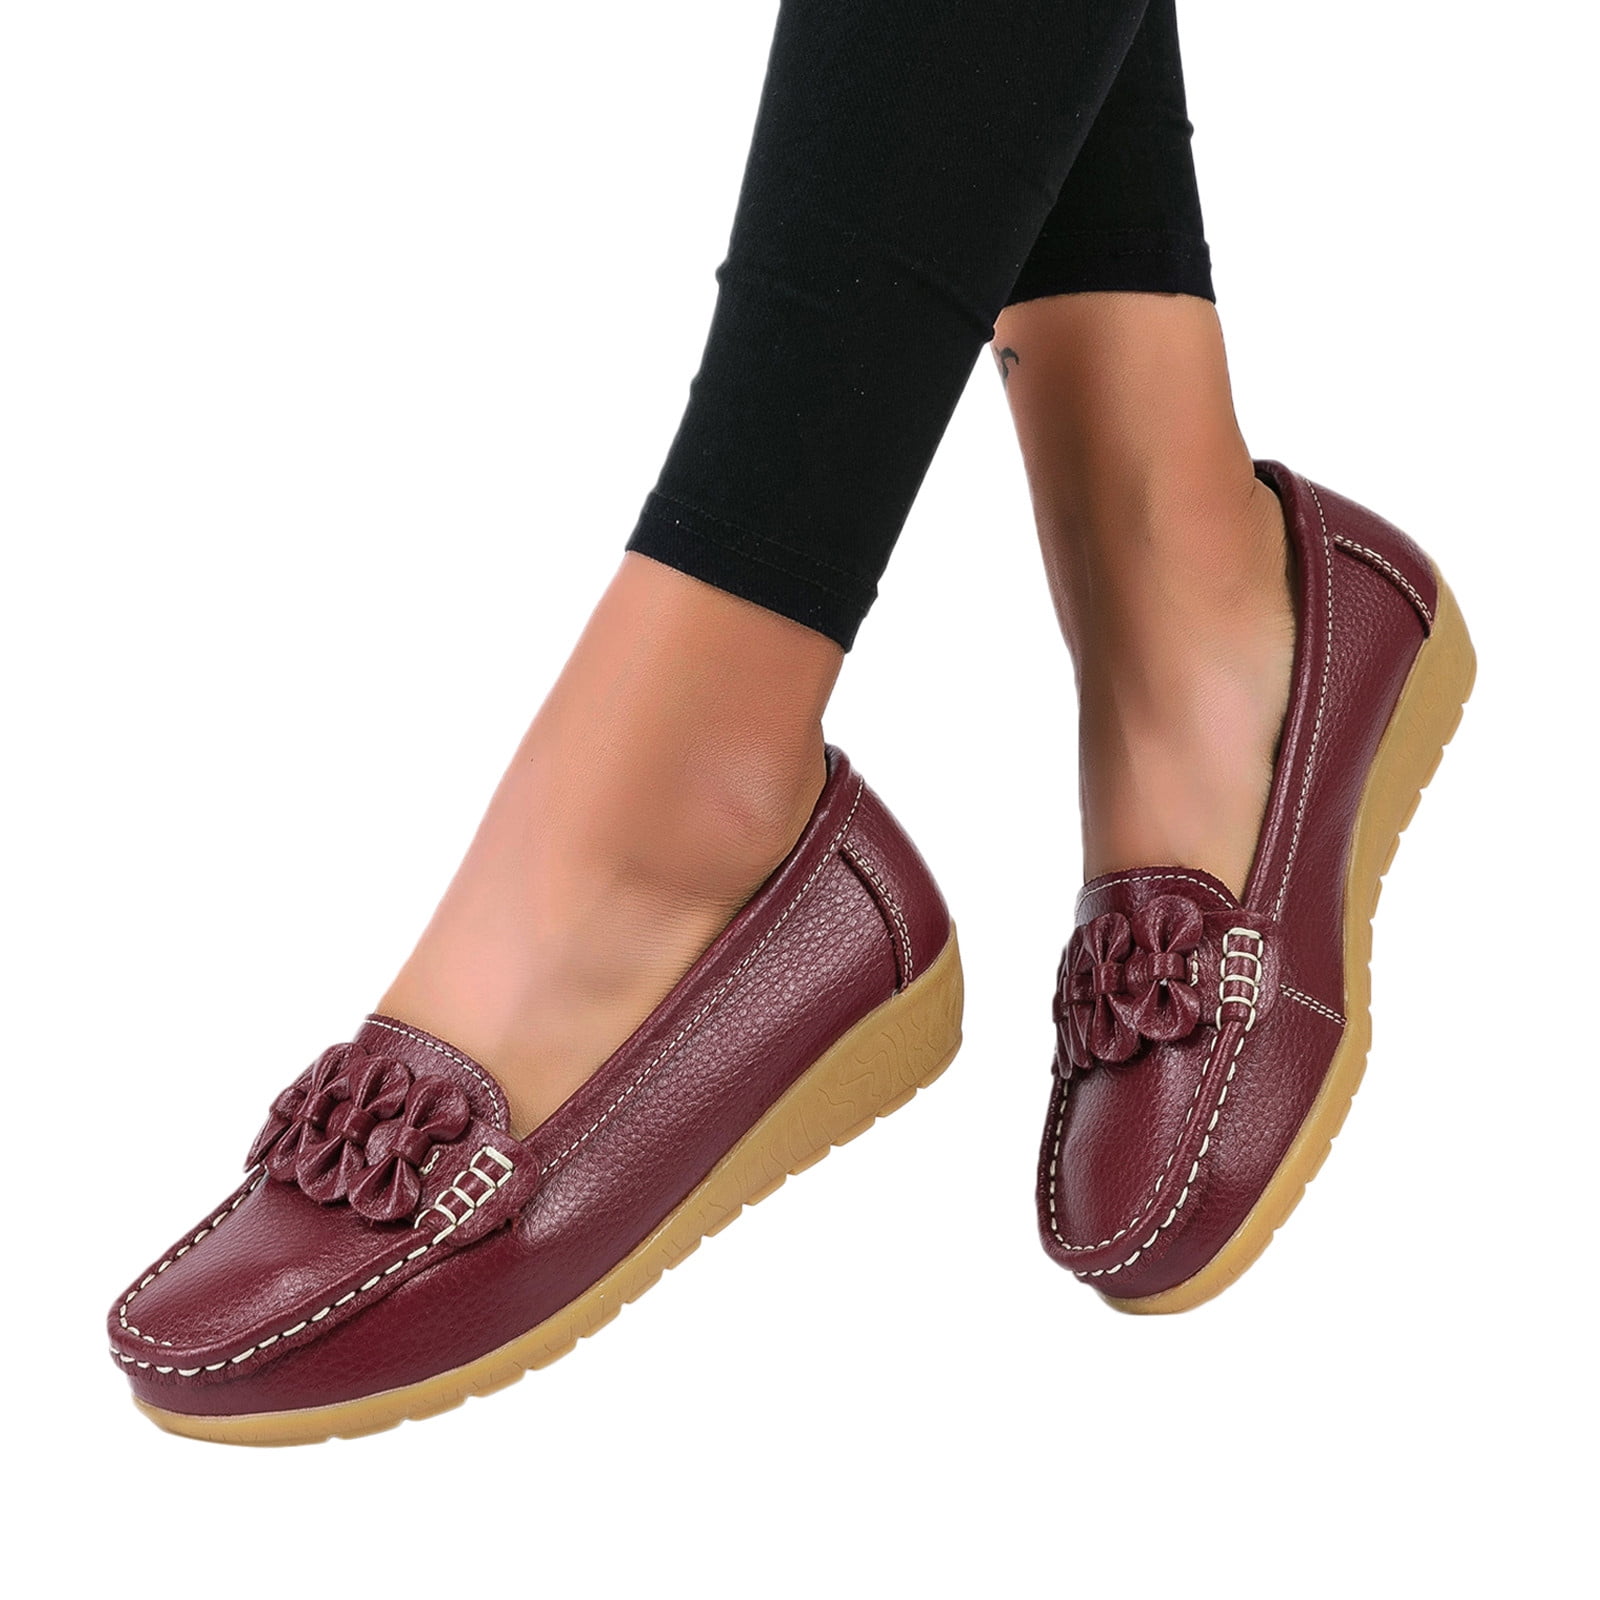 Womens Casual Slip On Leather shoes Moccasins Comfy Driving Flat Loafers Walking 